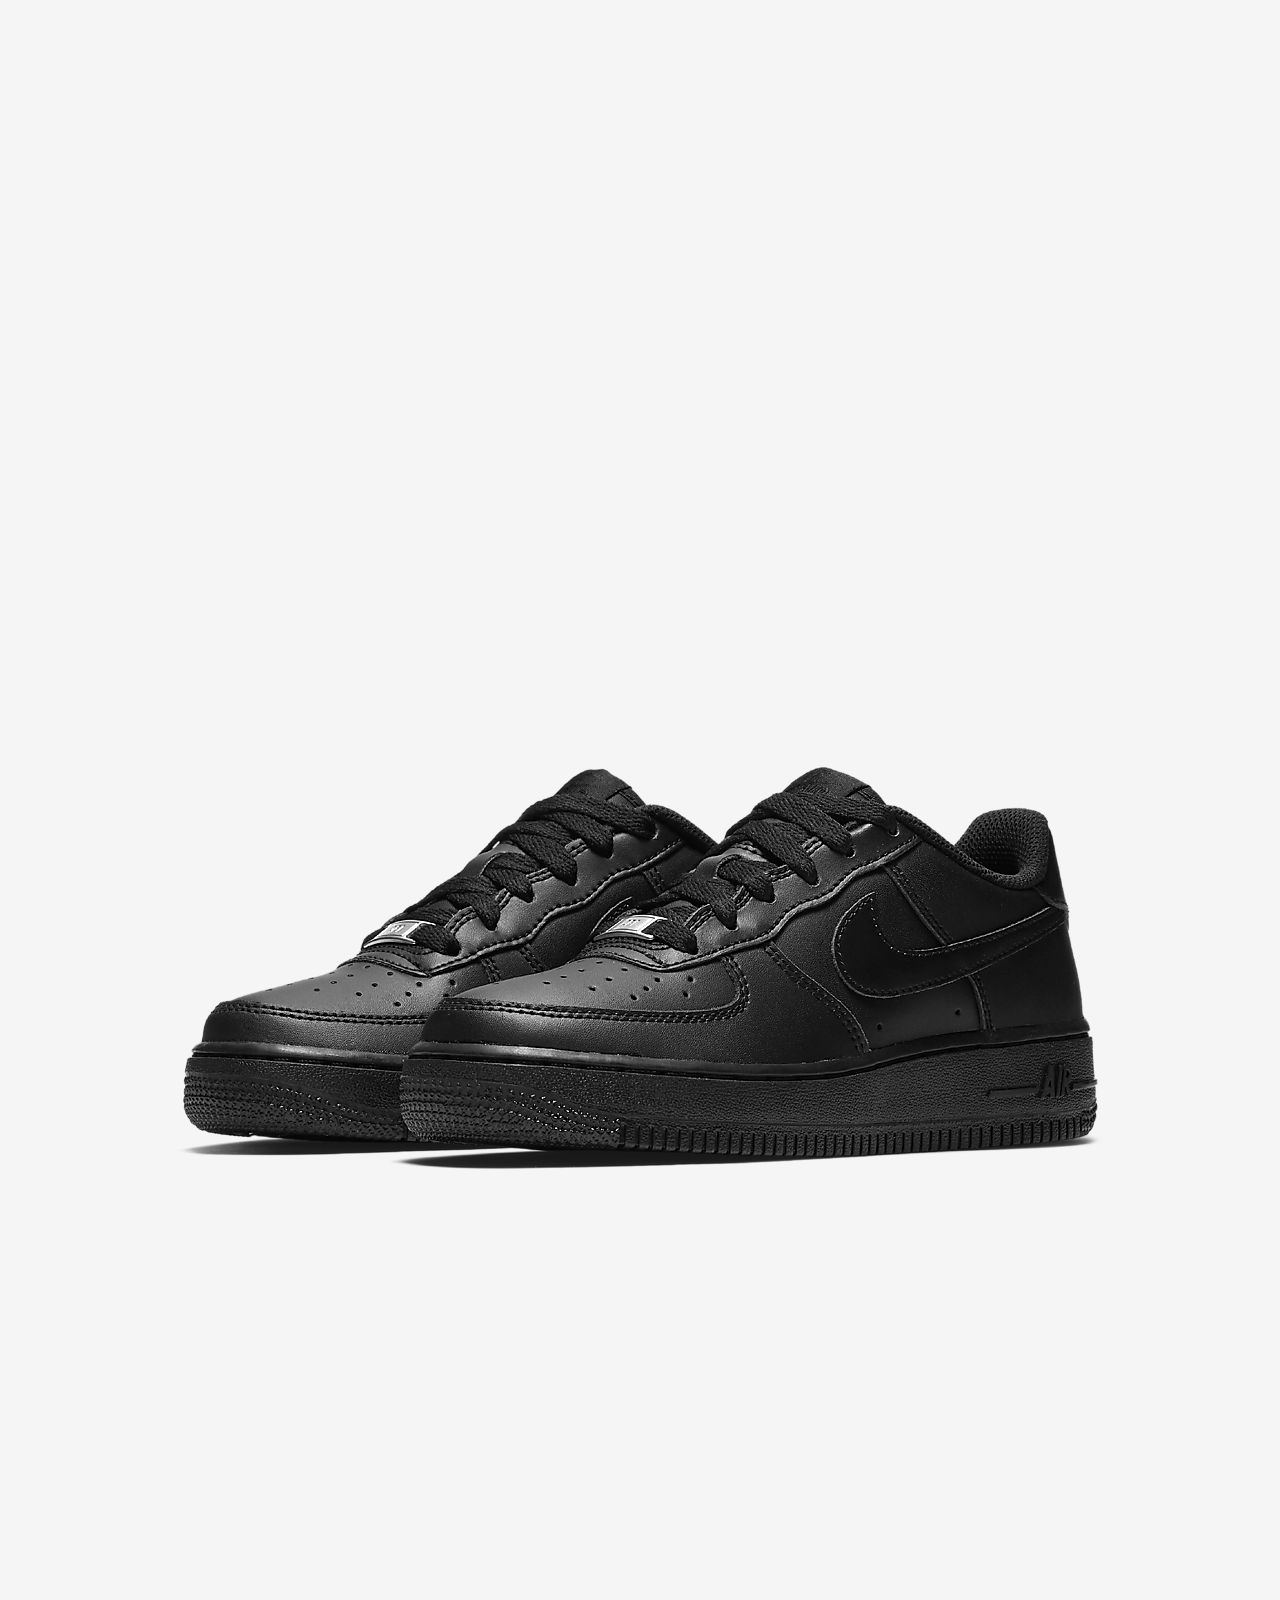 size 6 black air force 1